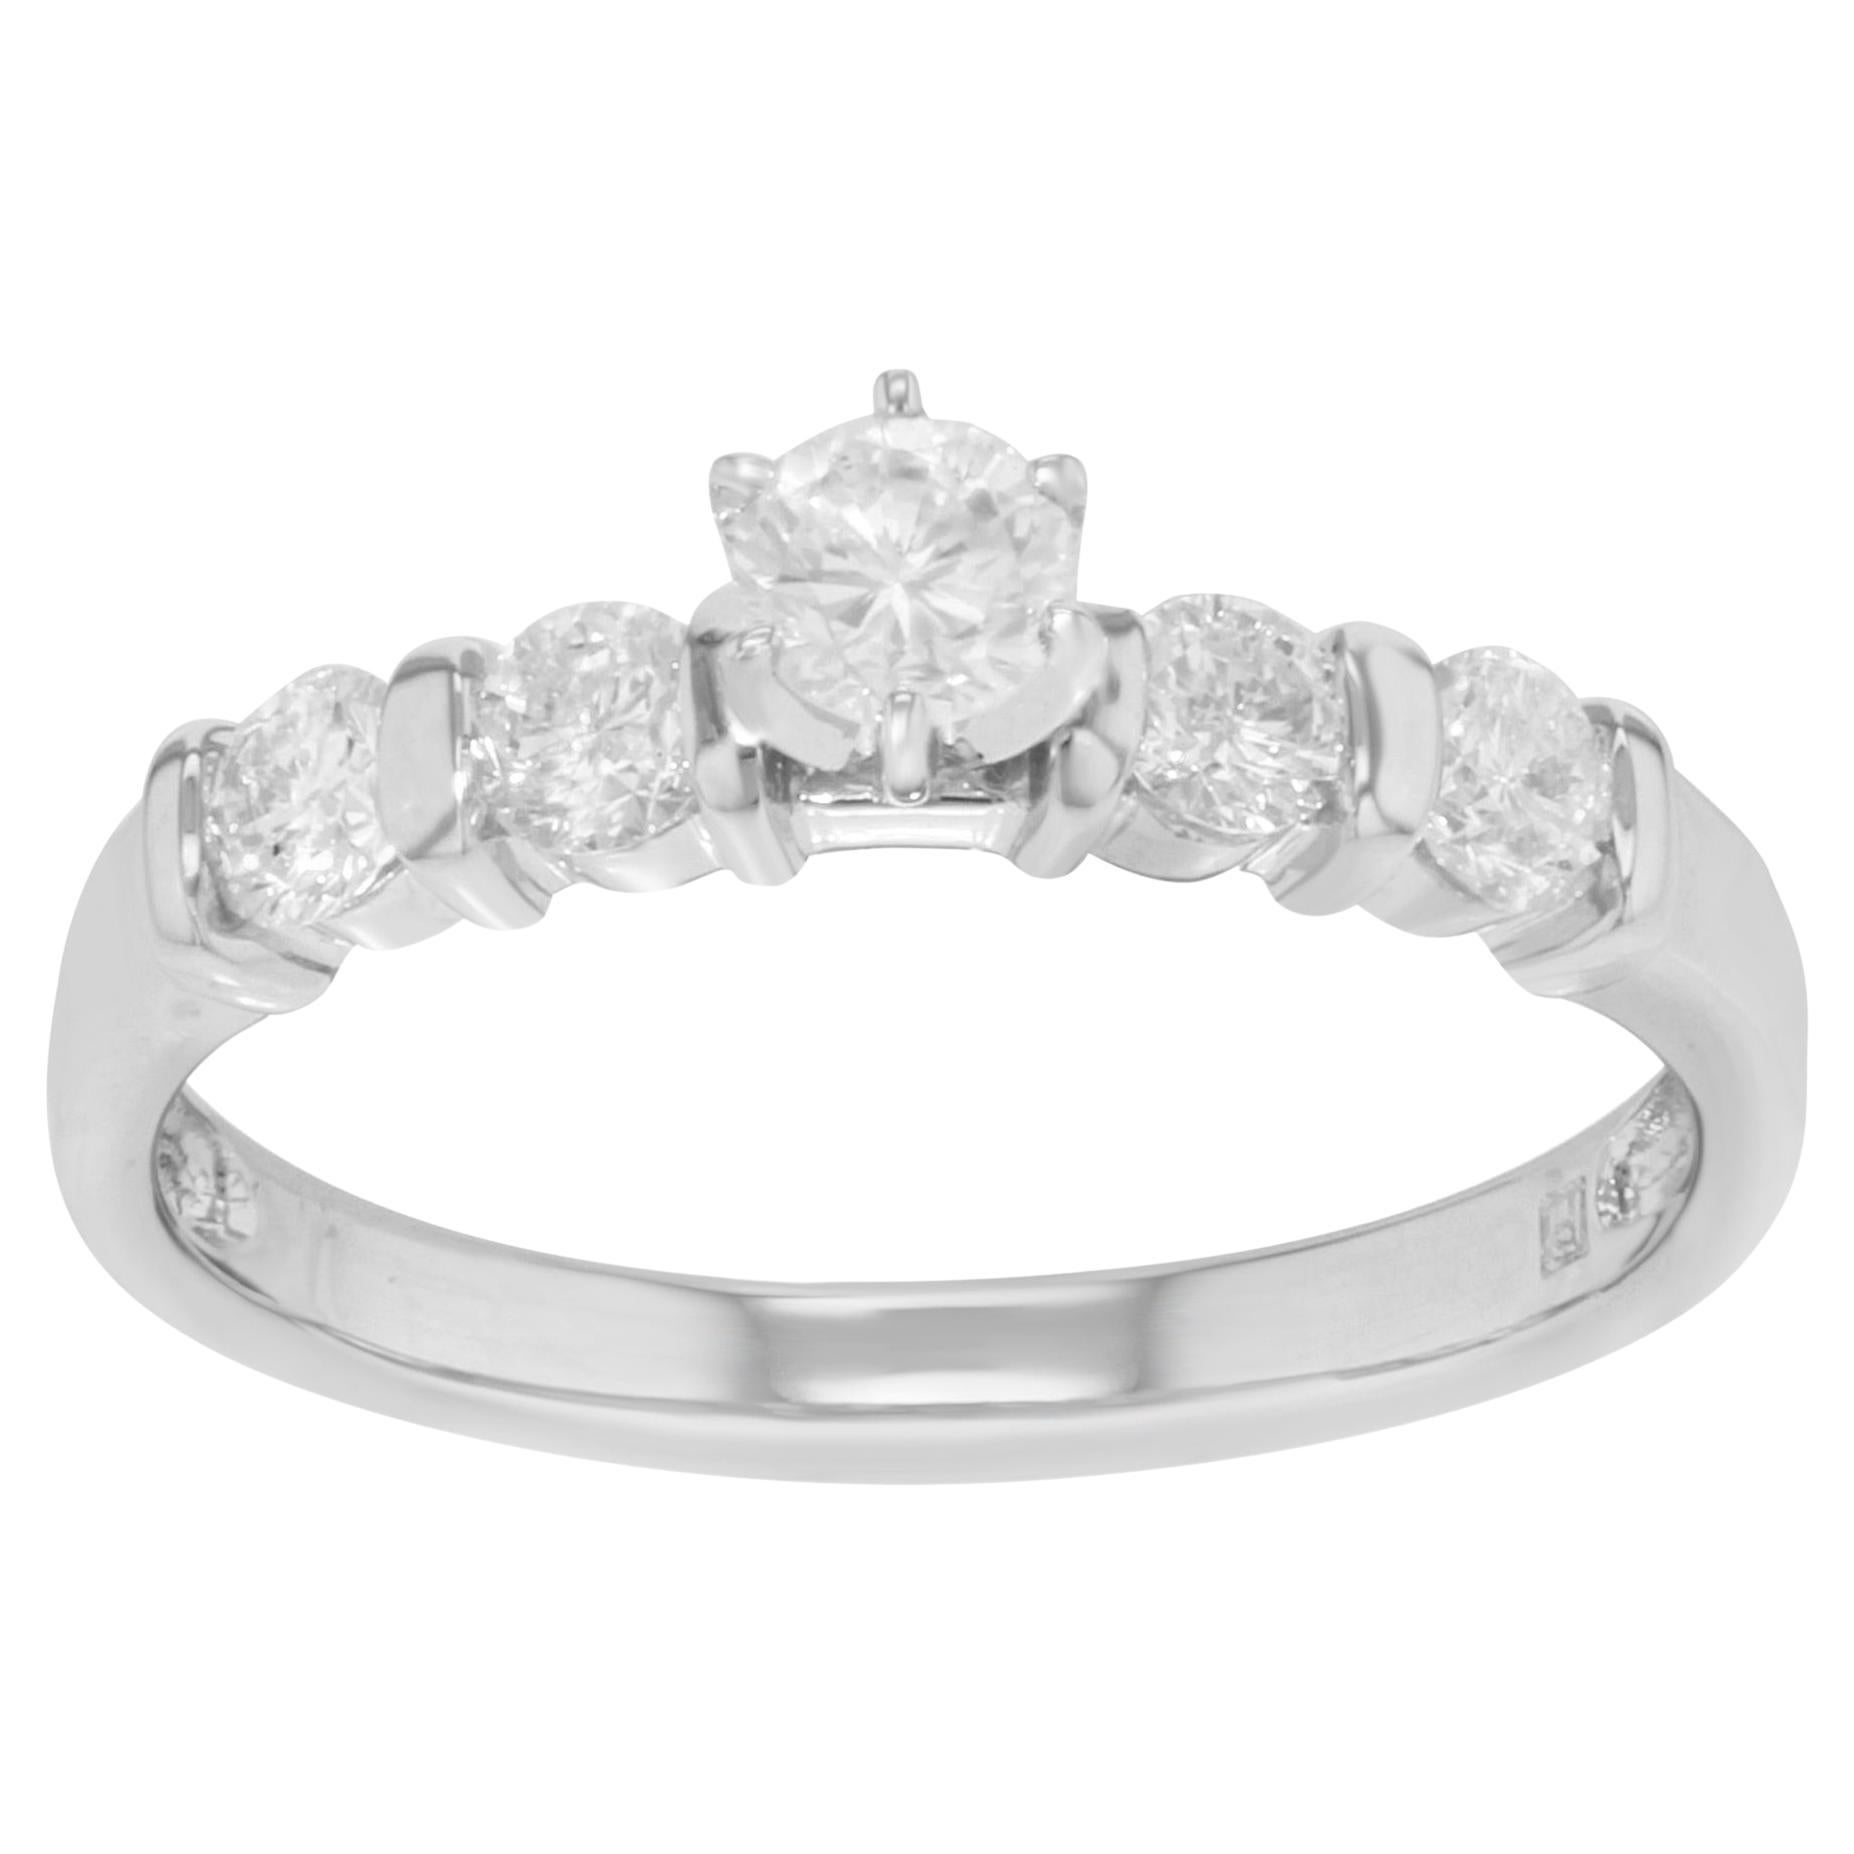 Diamond Accented Ladies Engagement Ring 14K White Gold 0.66 Cttw